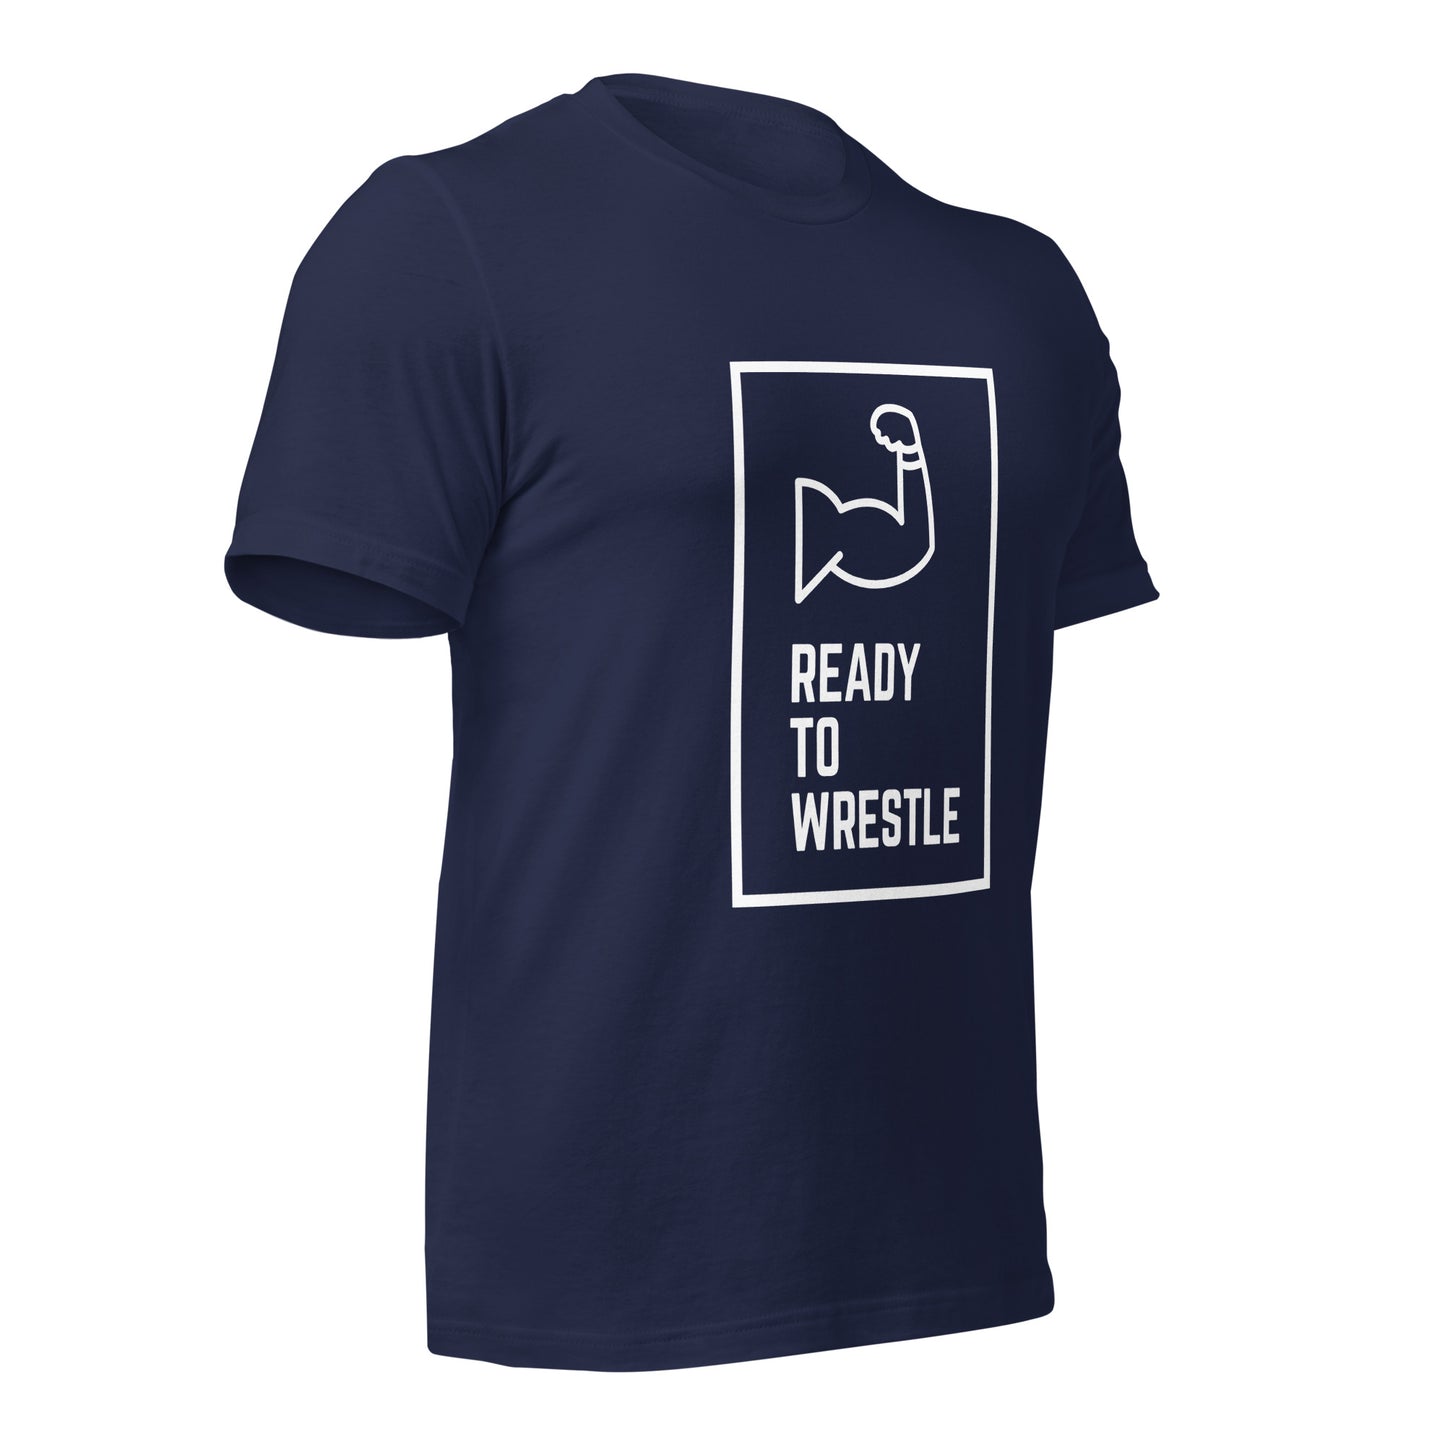 Ready to Wrestle Printed t-shirt